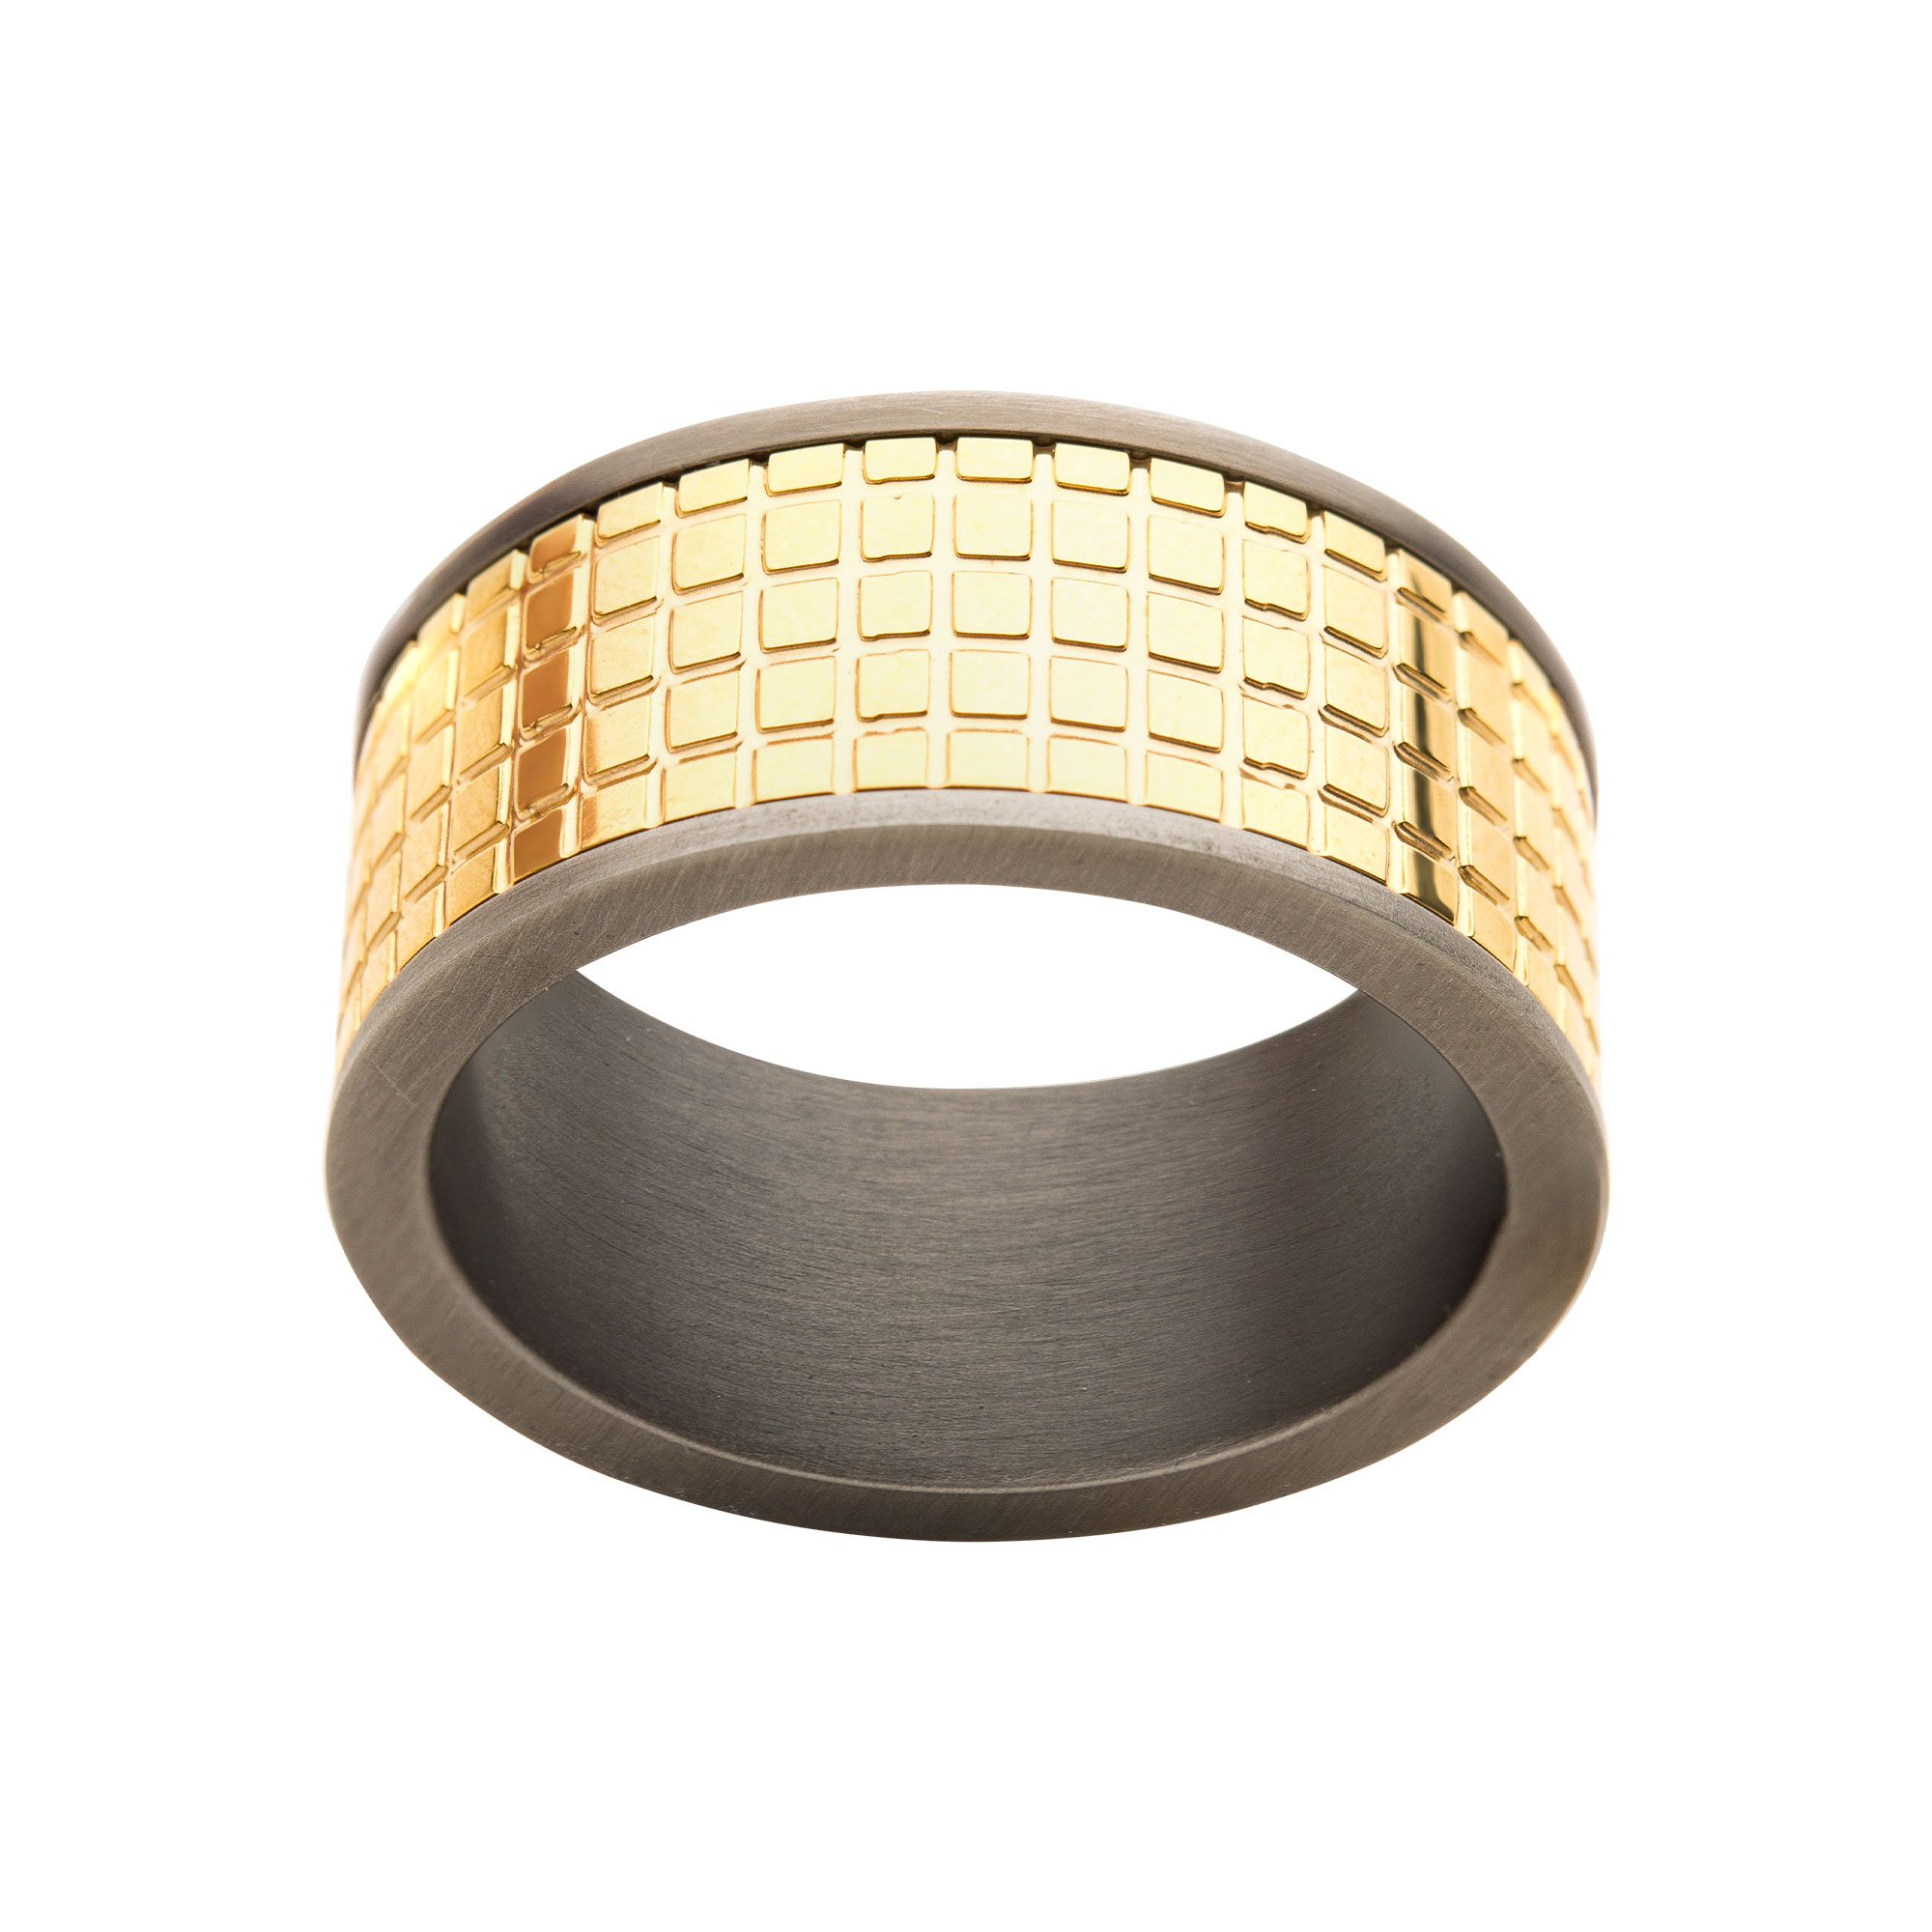 Gun Metal Plated with 18K Gold Plated Grid Inlay Ring Image 2 Lewis Jewelers, Inc. Ansonia, CT